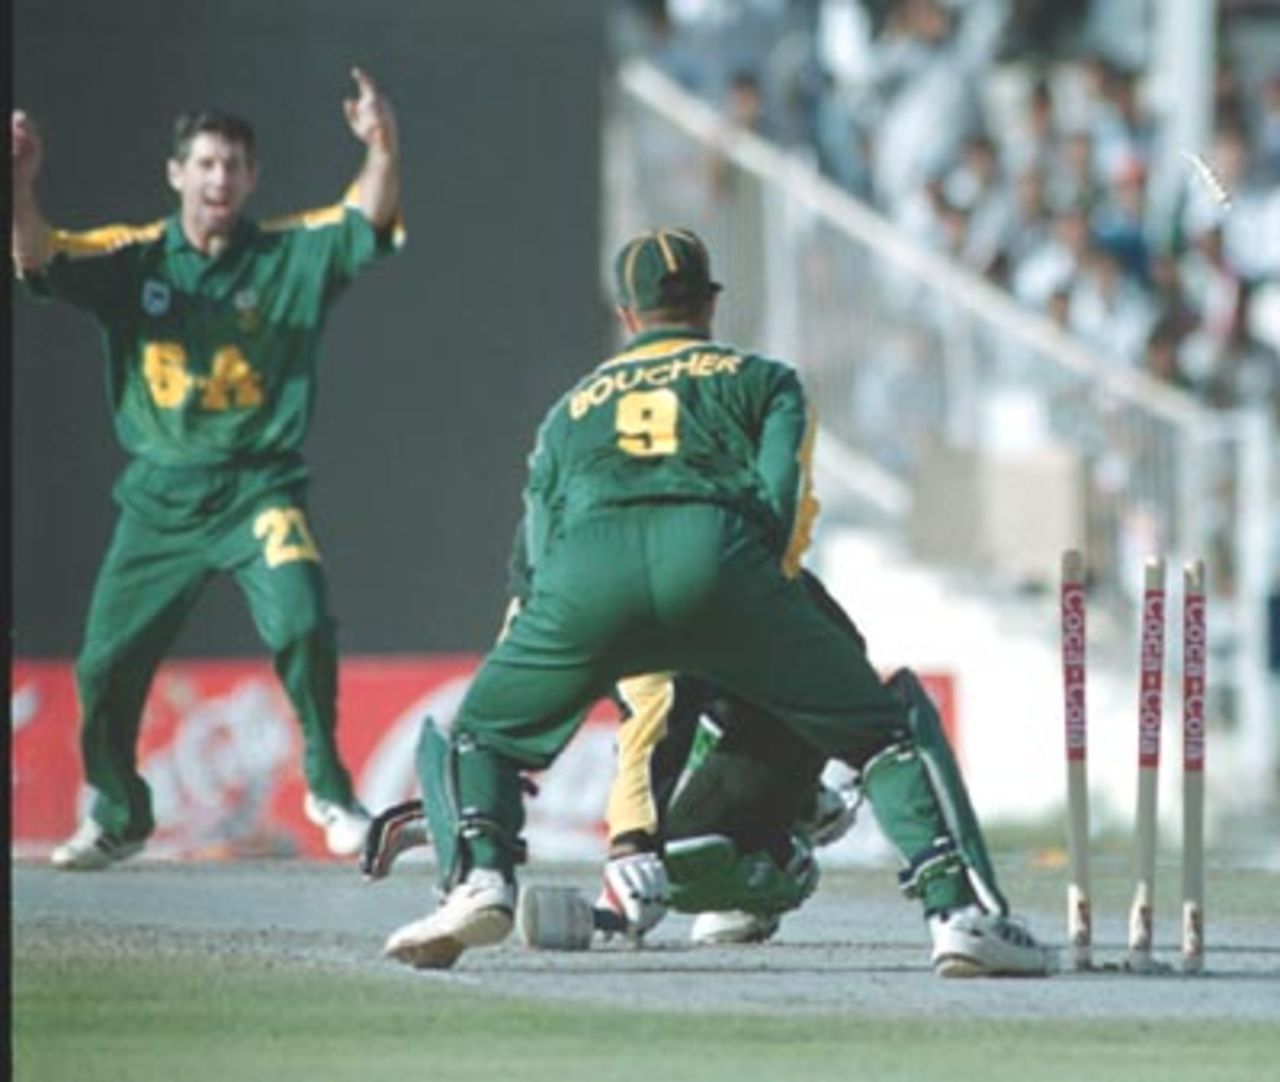 Crookes leaps in joy after having Imran Nazir stumped by Mark Boucher, Pakistan v South Africa, Coca-Cola Cup 1999/00, Final, Sharjah C.A. Stadium, 31 March 2000.